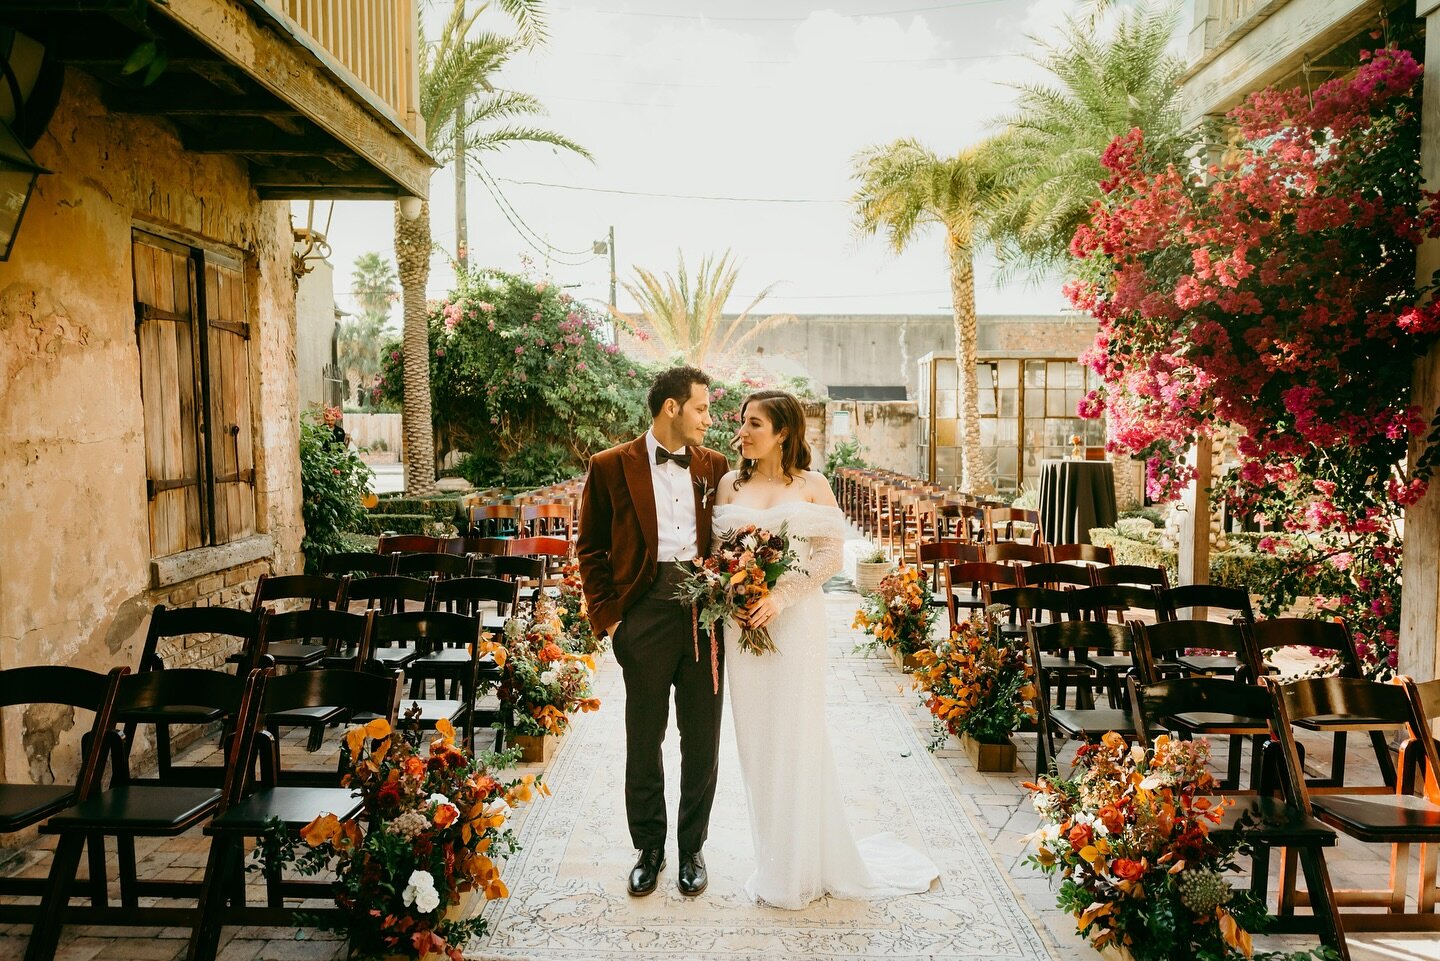 &ldquo;I look at you and see the rest of my life in front of my eyes.&rdquo;

Rachel + Rami 

11.04.2023 🍾

Wedding Planner: @luxeventplanninganddesign 
Photographer: @longyauphotography 
Florist: &ldquo;The Maid of Honor&rdquo; 
Venue: @raceandreli